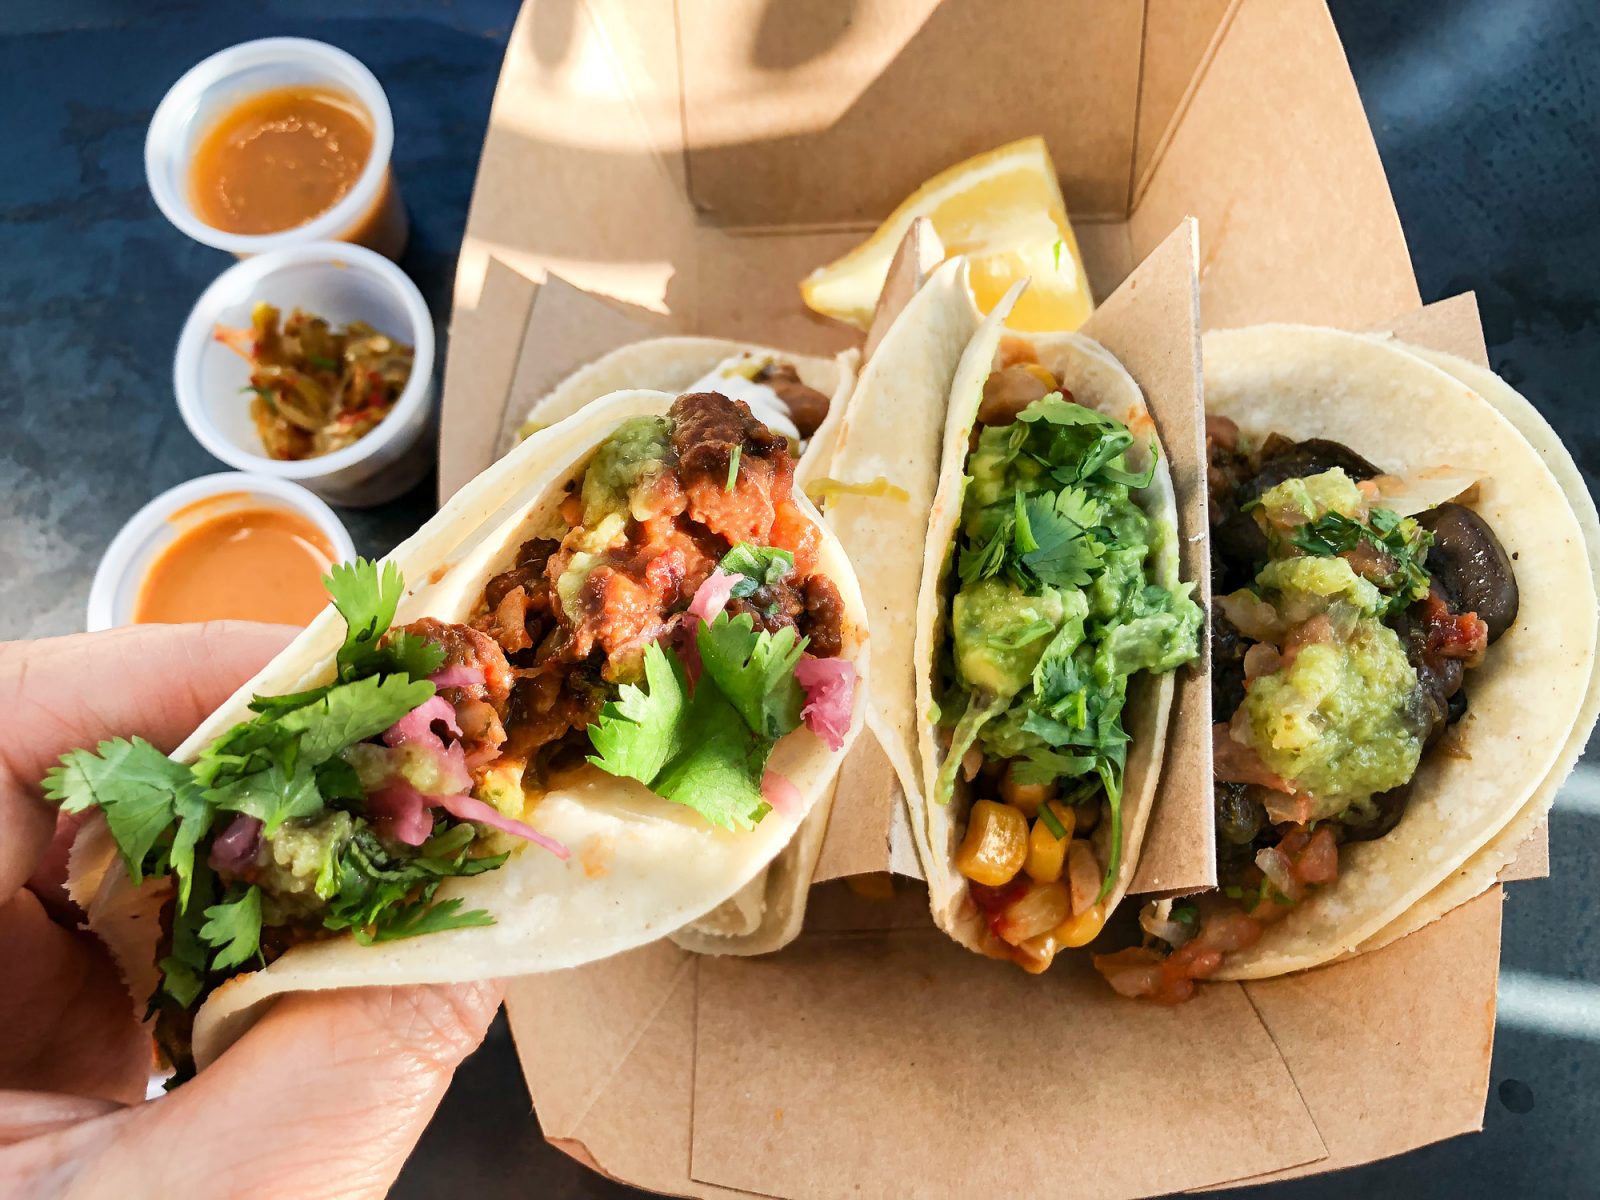 A close-up of a hand holding a vegan taco. Two other tacos sit in a take-out container on a table in the background.